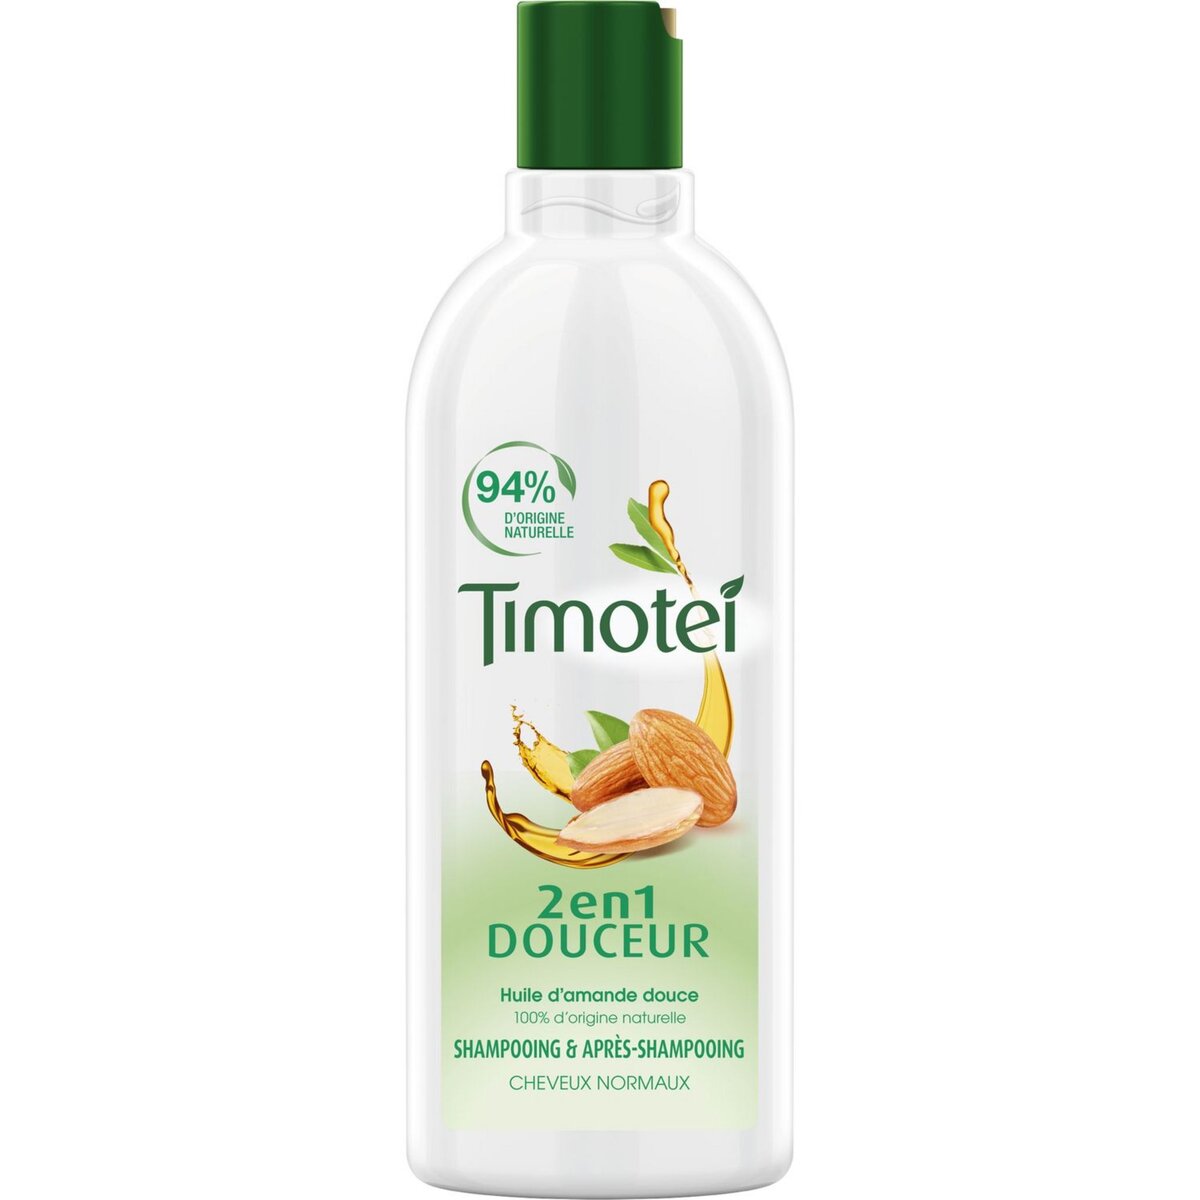 TIMOTEI Timotei Shampooing & après-shampooing douceur cheveux normaux 300ml 300ml